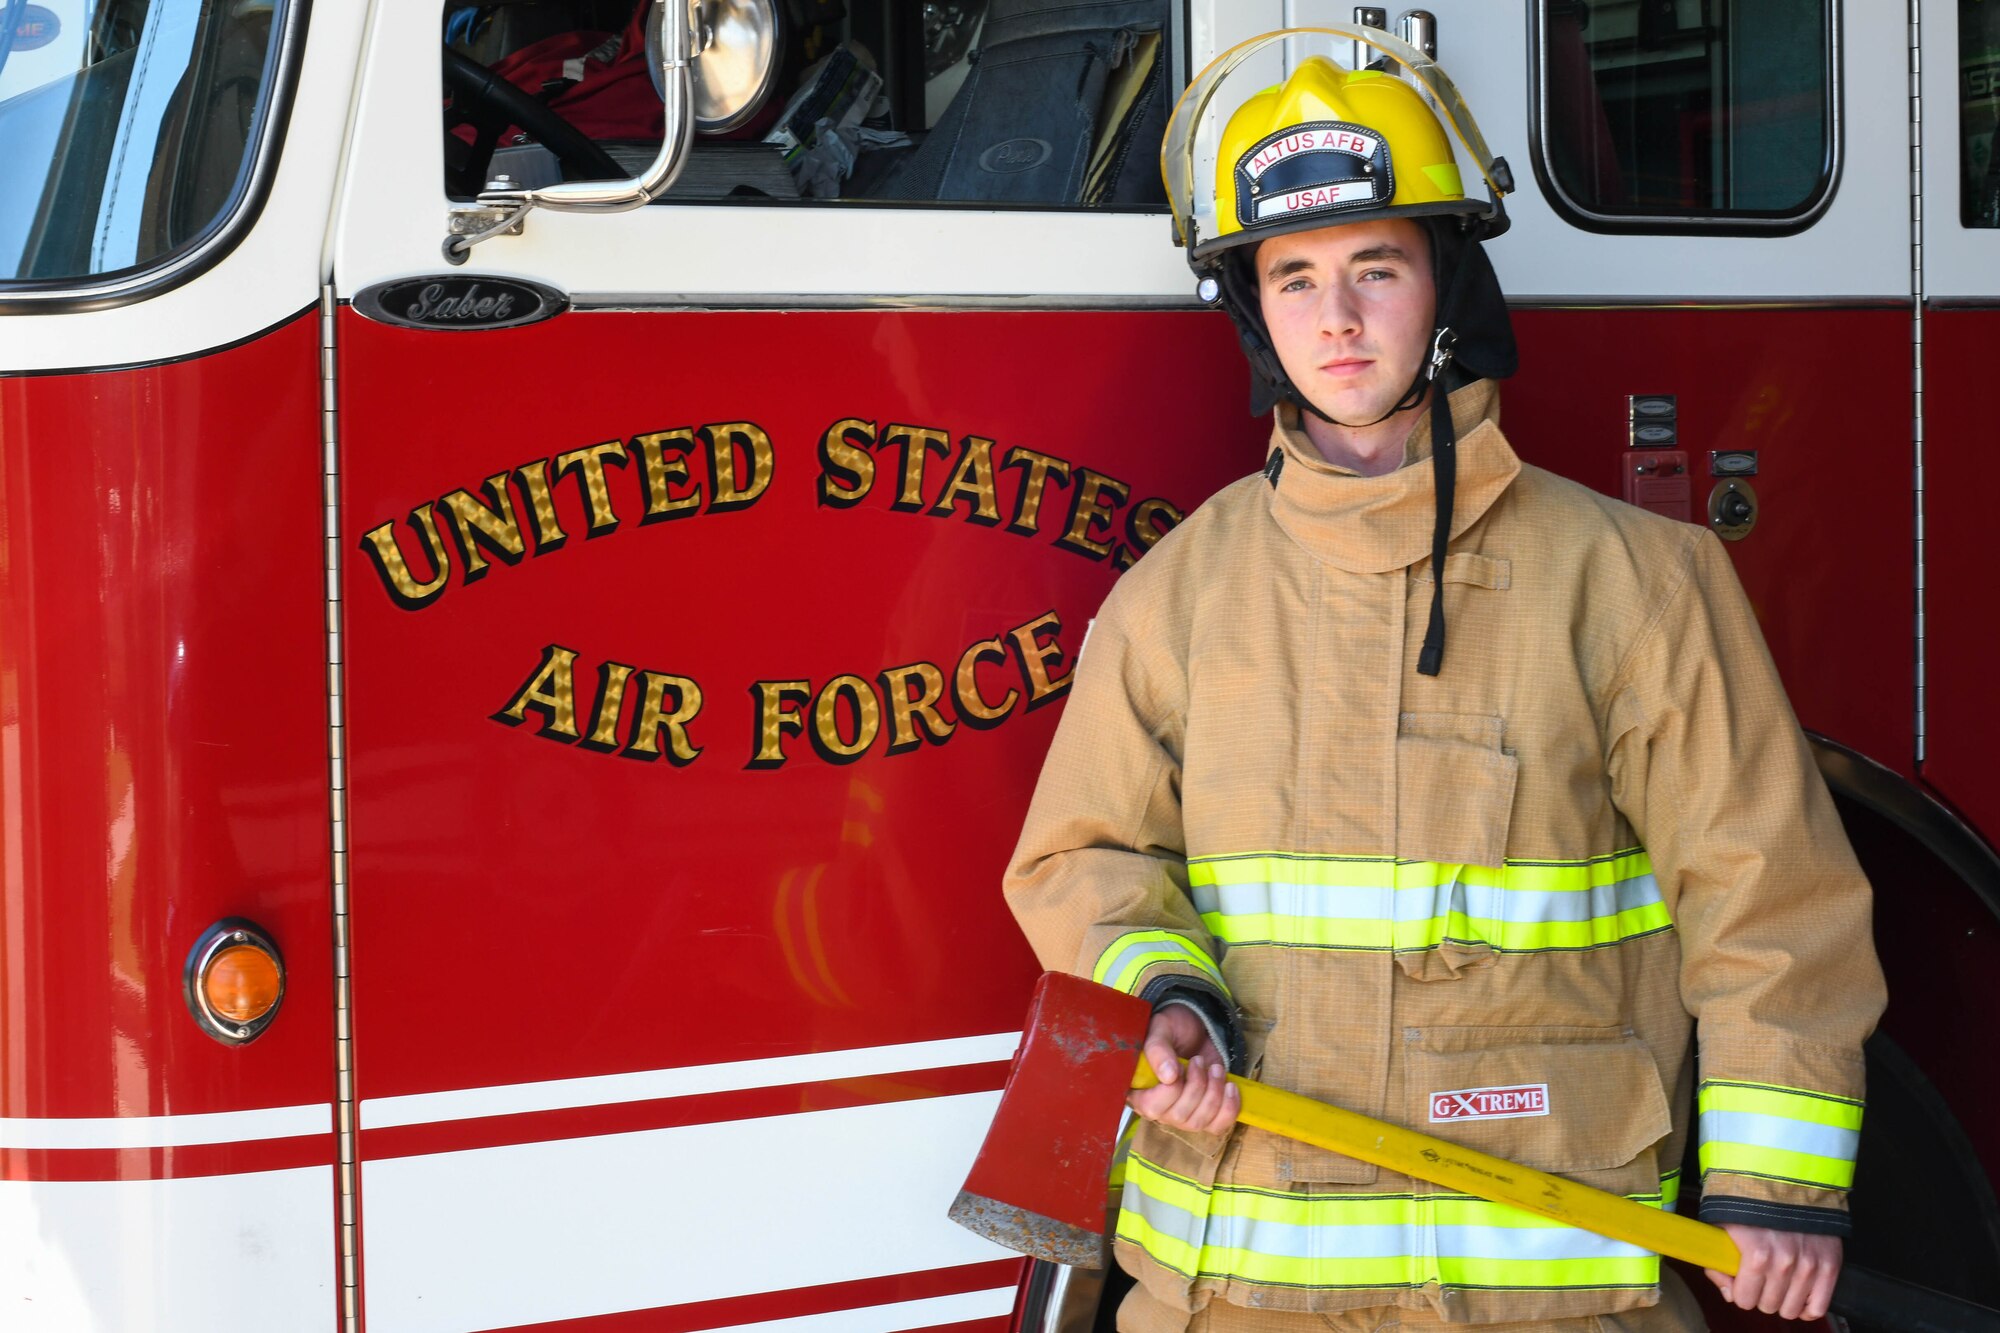 U.S. Air Force Airman 1st Class Joseph Coveney, 97th Civil Engineer Squadron (CES) fire prevention specialist, poses next to Engine 11 at the fire department on Altus Air Force Base, Oklahoma, Oct. 4, 2021. The 97th CES Fire and Emergency Services Flight hosted Fire Prevention Week from October 4-9, where they hosted multiple educational activities throughout the week. (U.S. Air Force photo by Airman 1st Class Trenton Jancze)